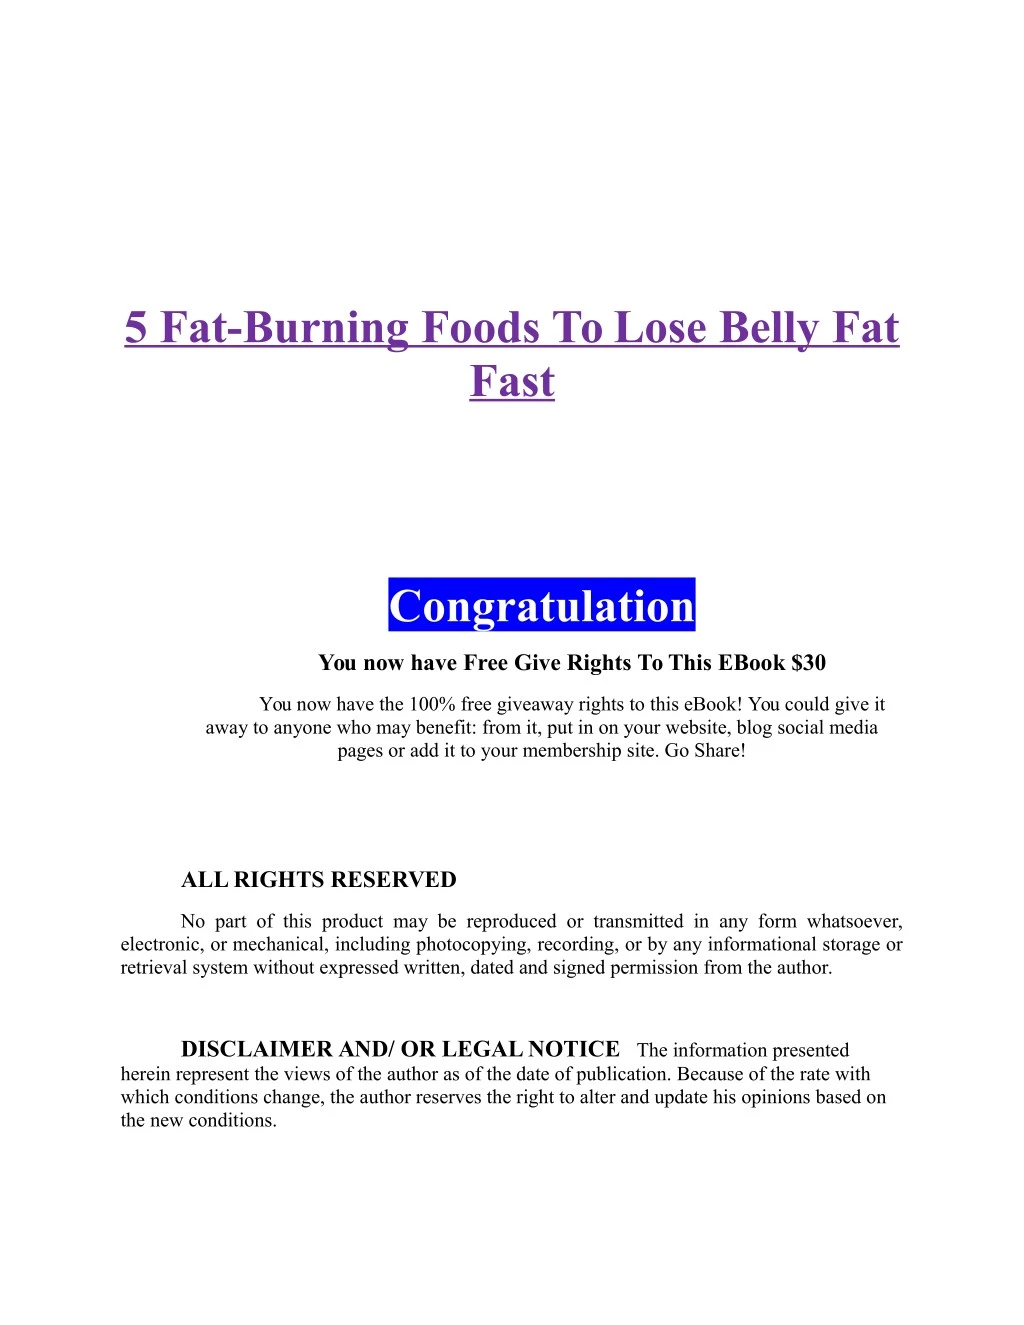 5 fat burning foods to lose belly fat fast